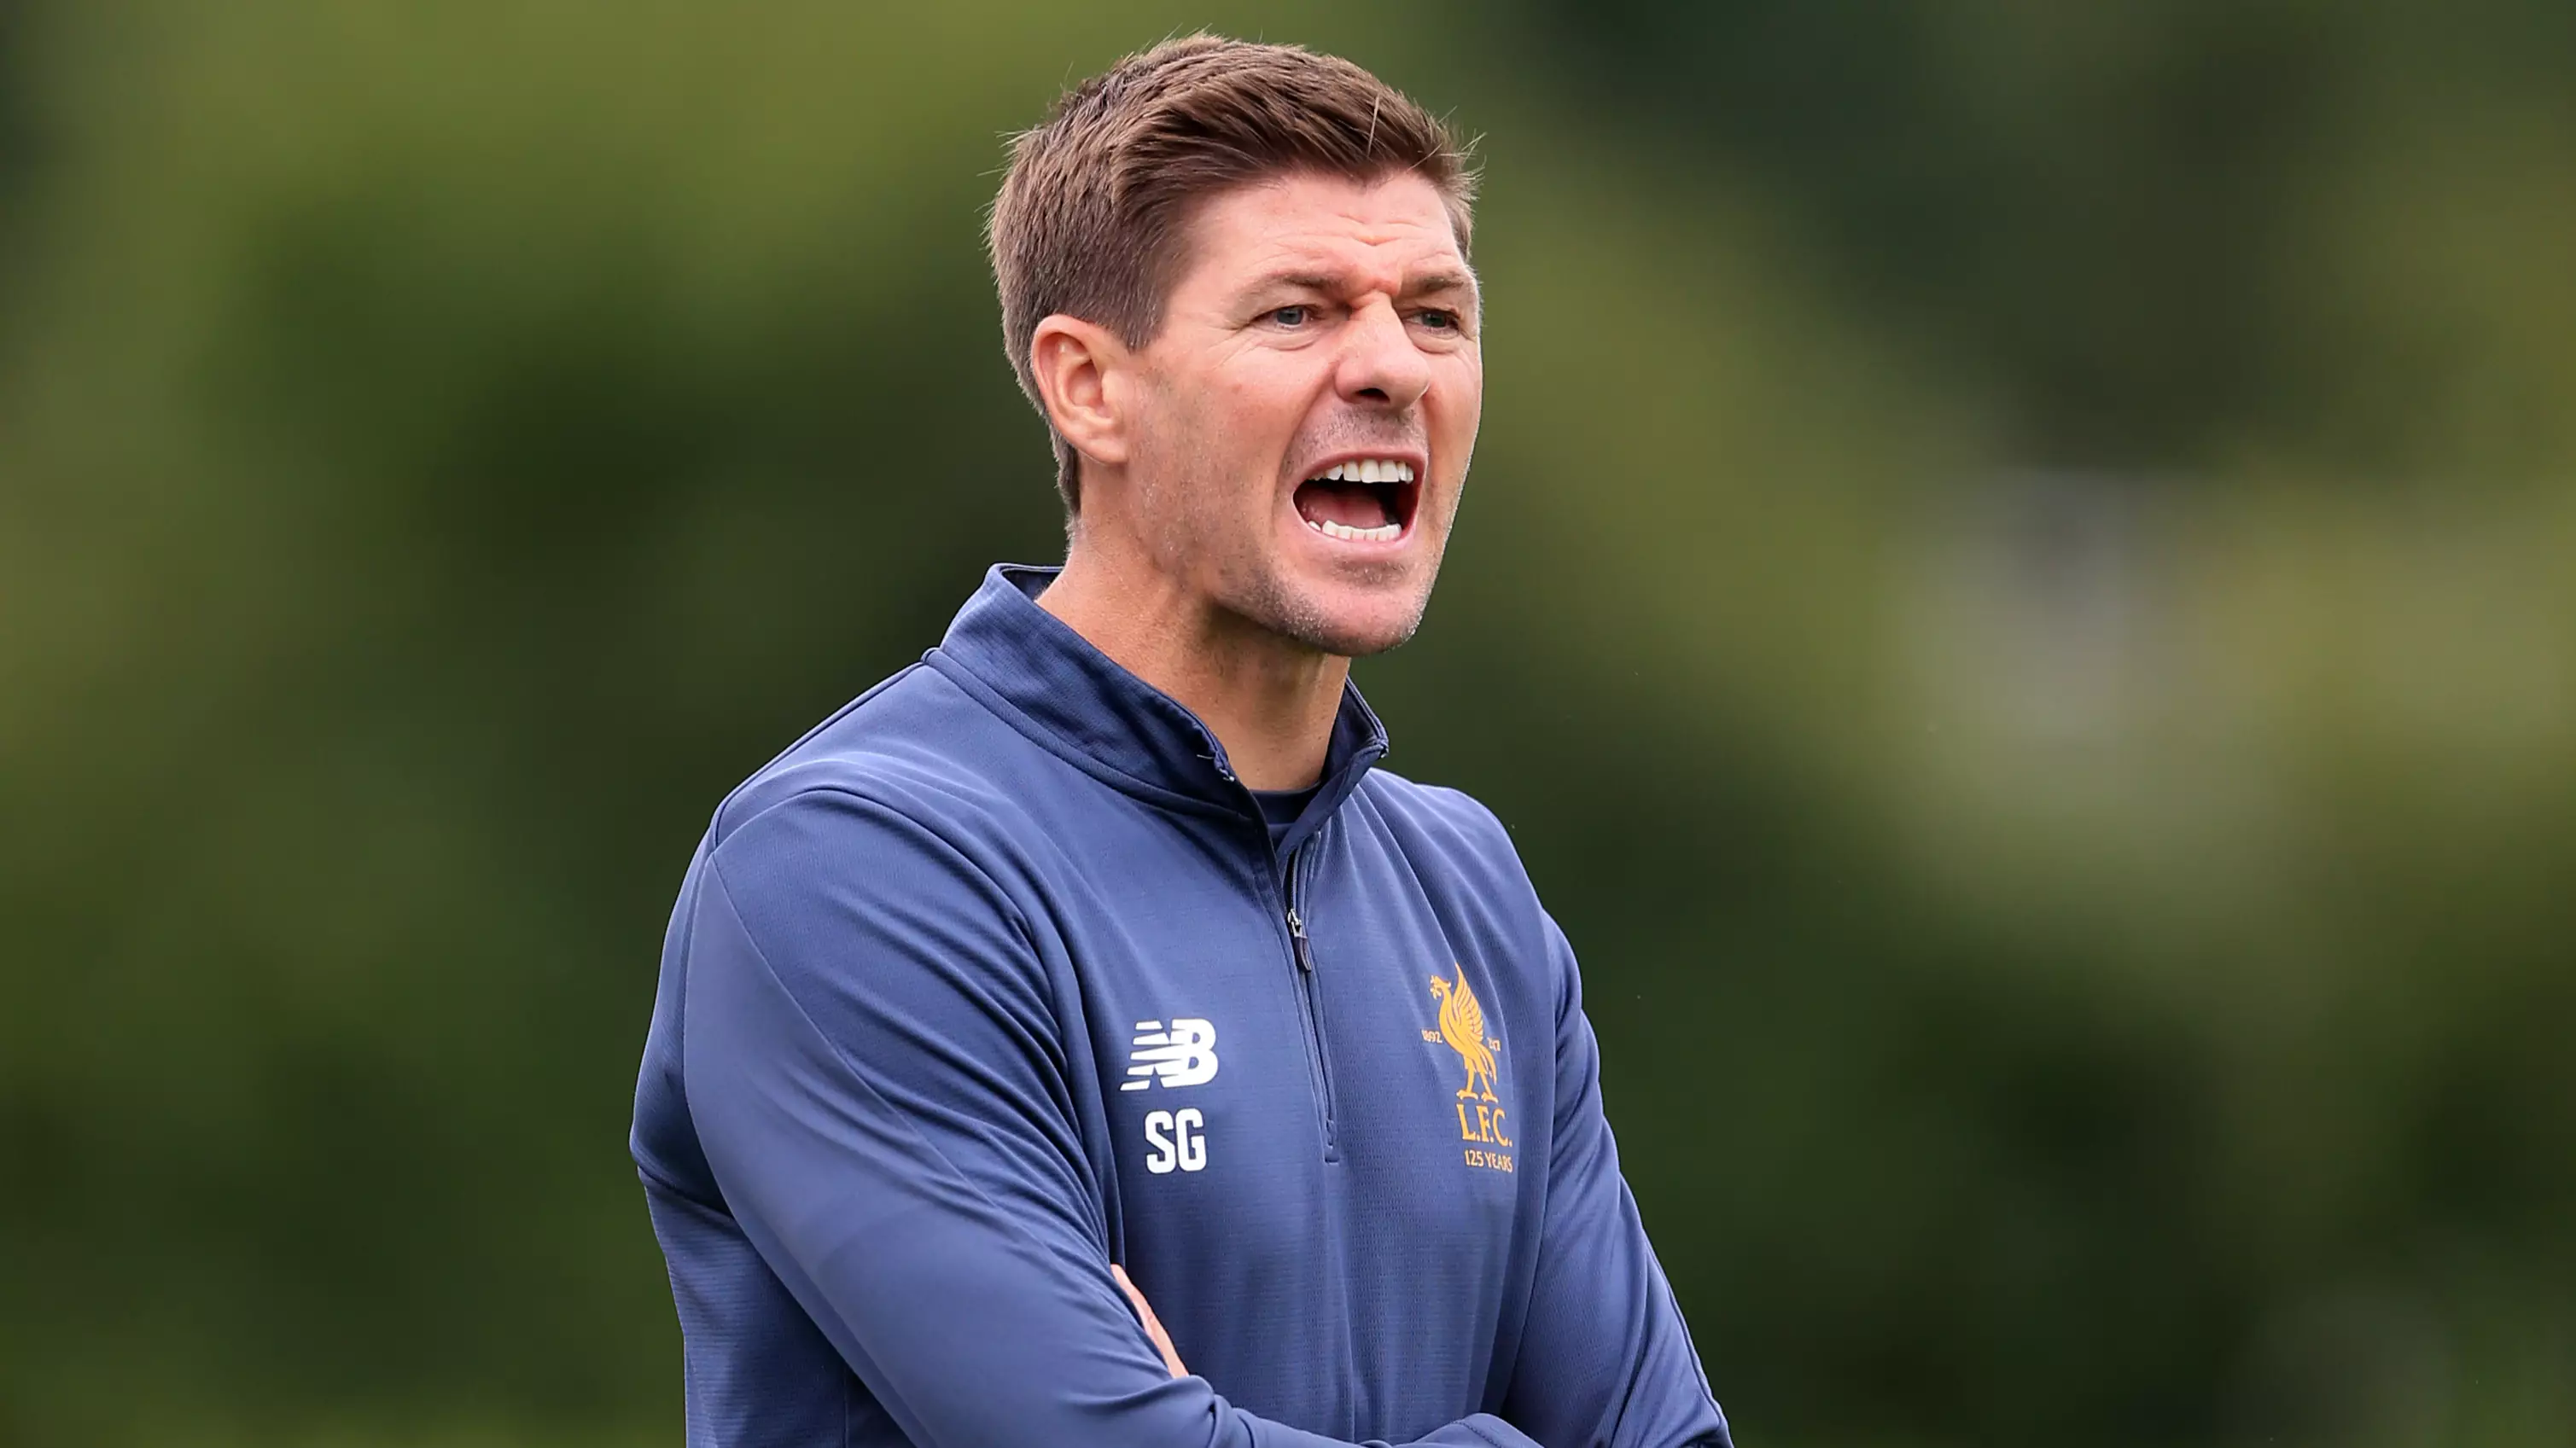 Gerrard coaching Liverpool's under 18s. Image: PA Images